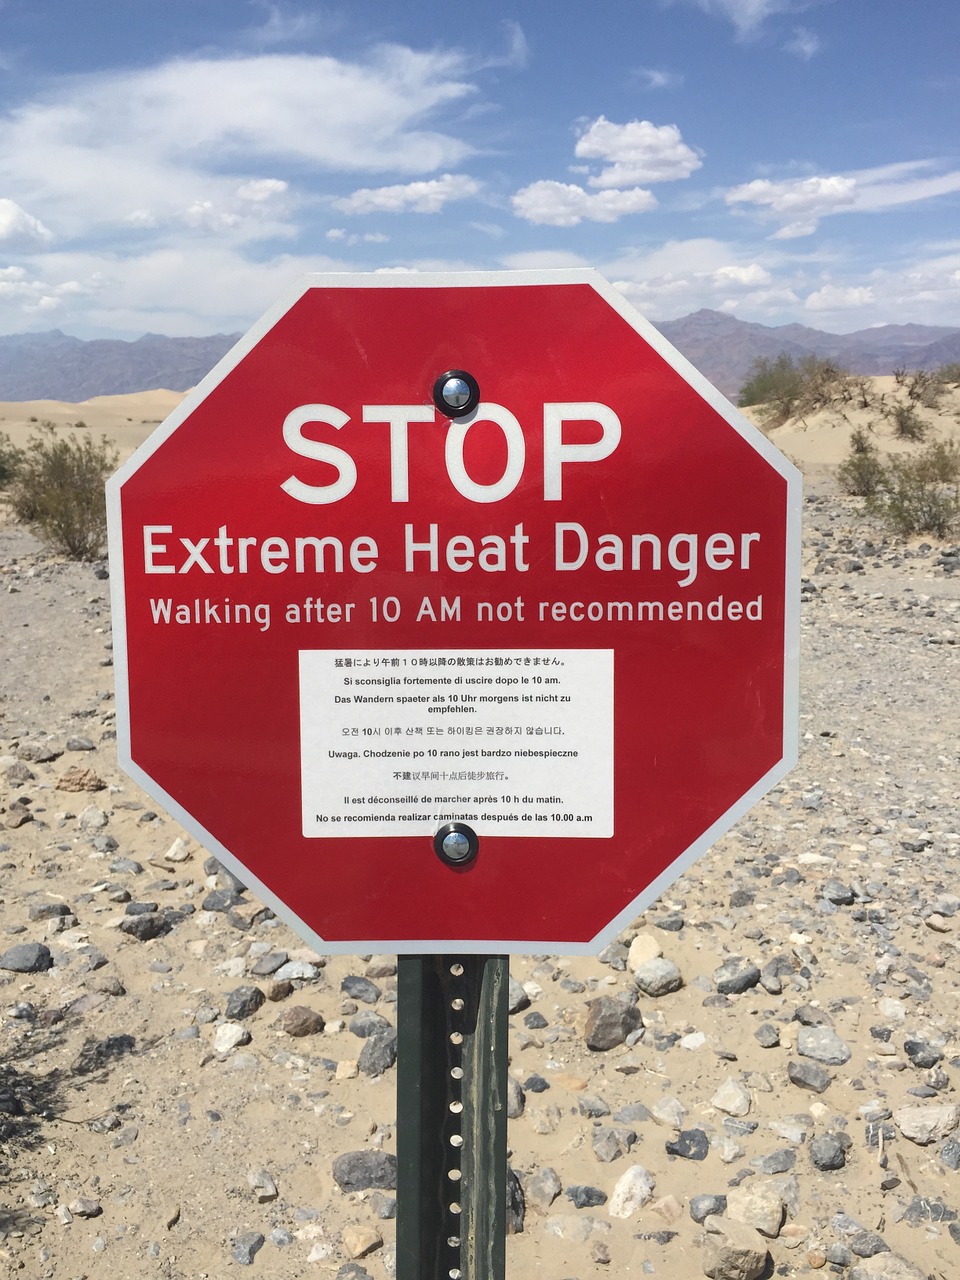 Download Free Photo Of Stop Signdeath Valleyextreme Heatwarningfree Pictures From 6300